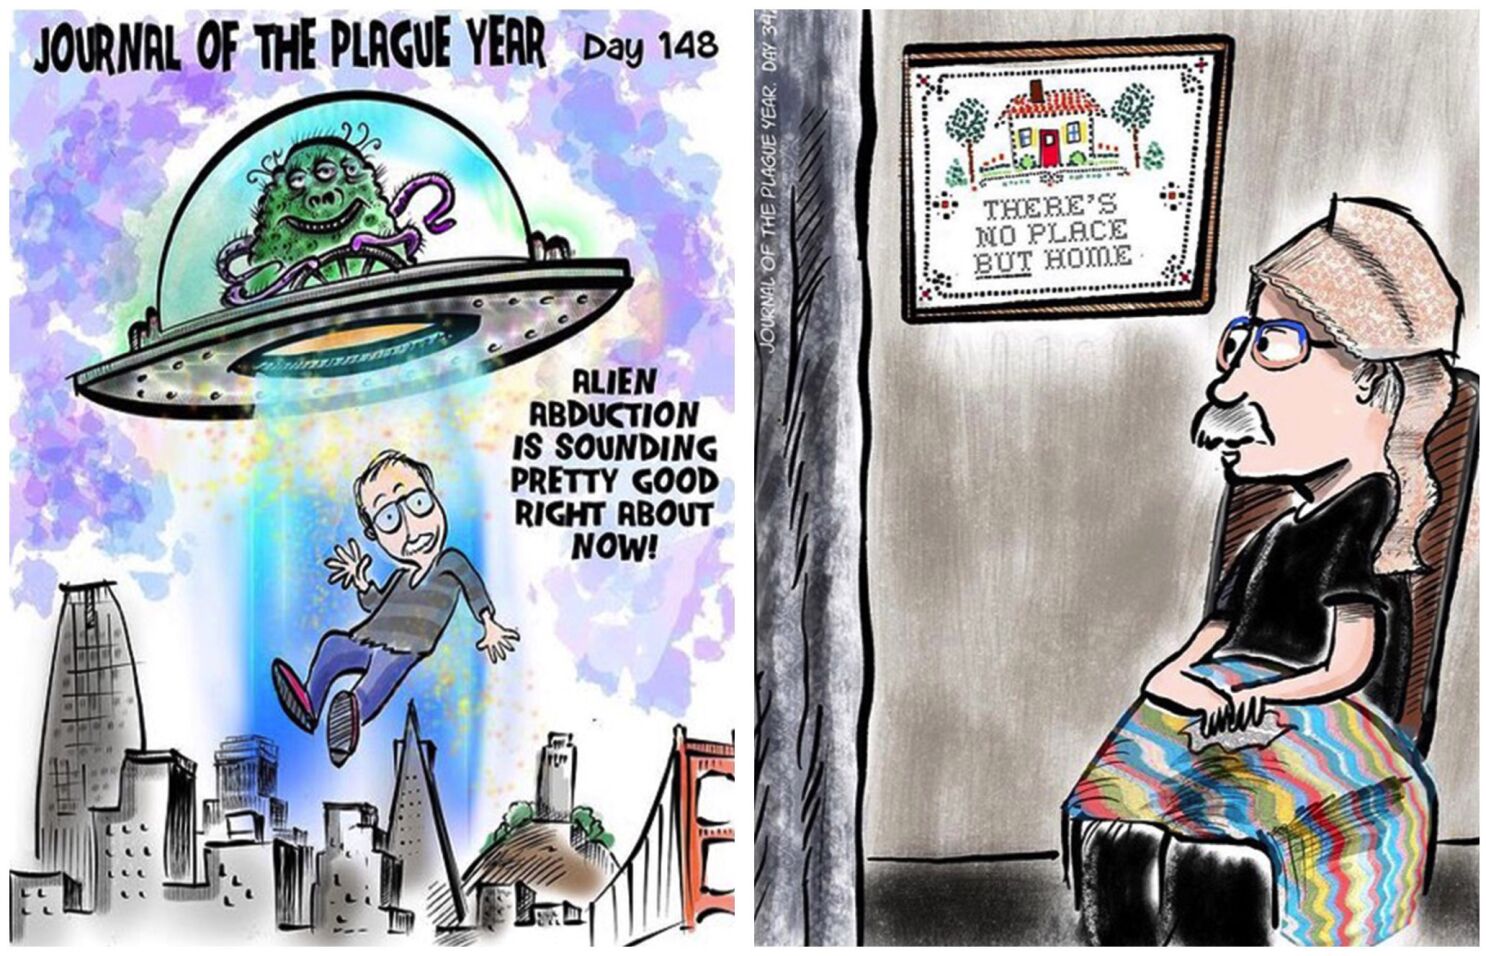 Cartoon journal reflects on COVID-19 pandemic effects - Los Angeles Times